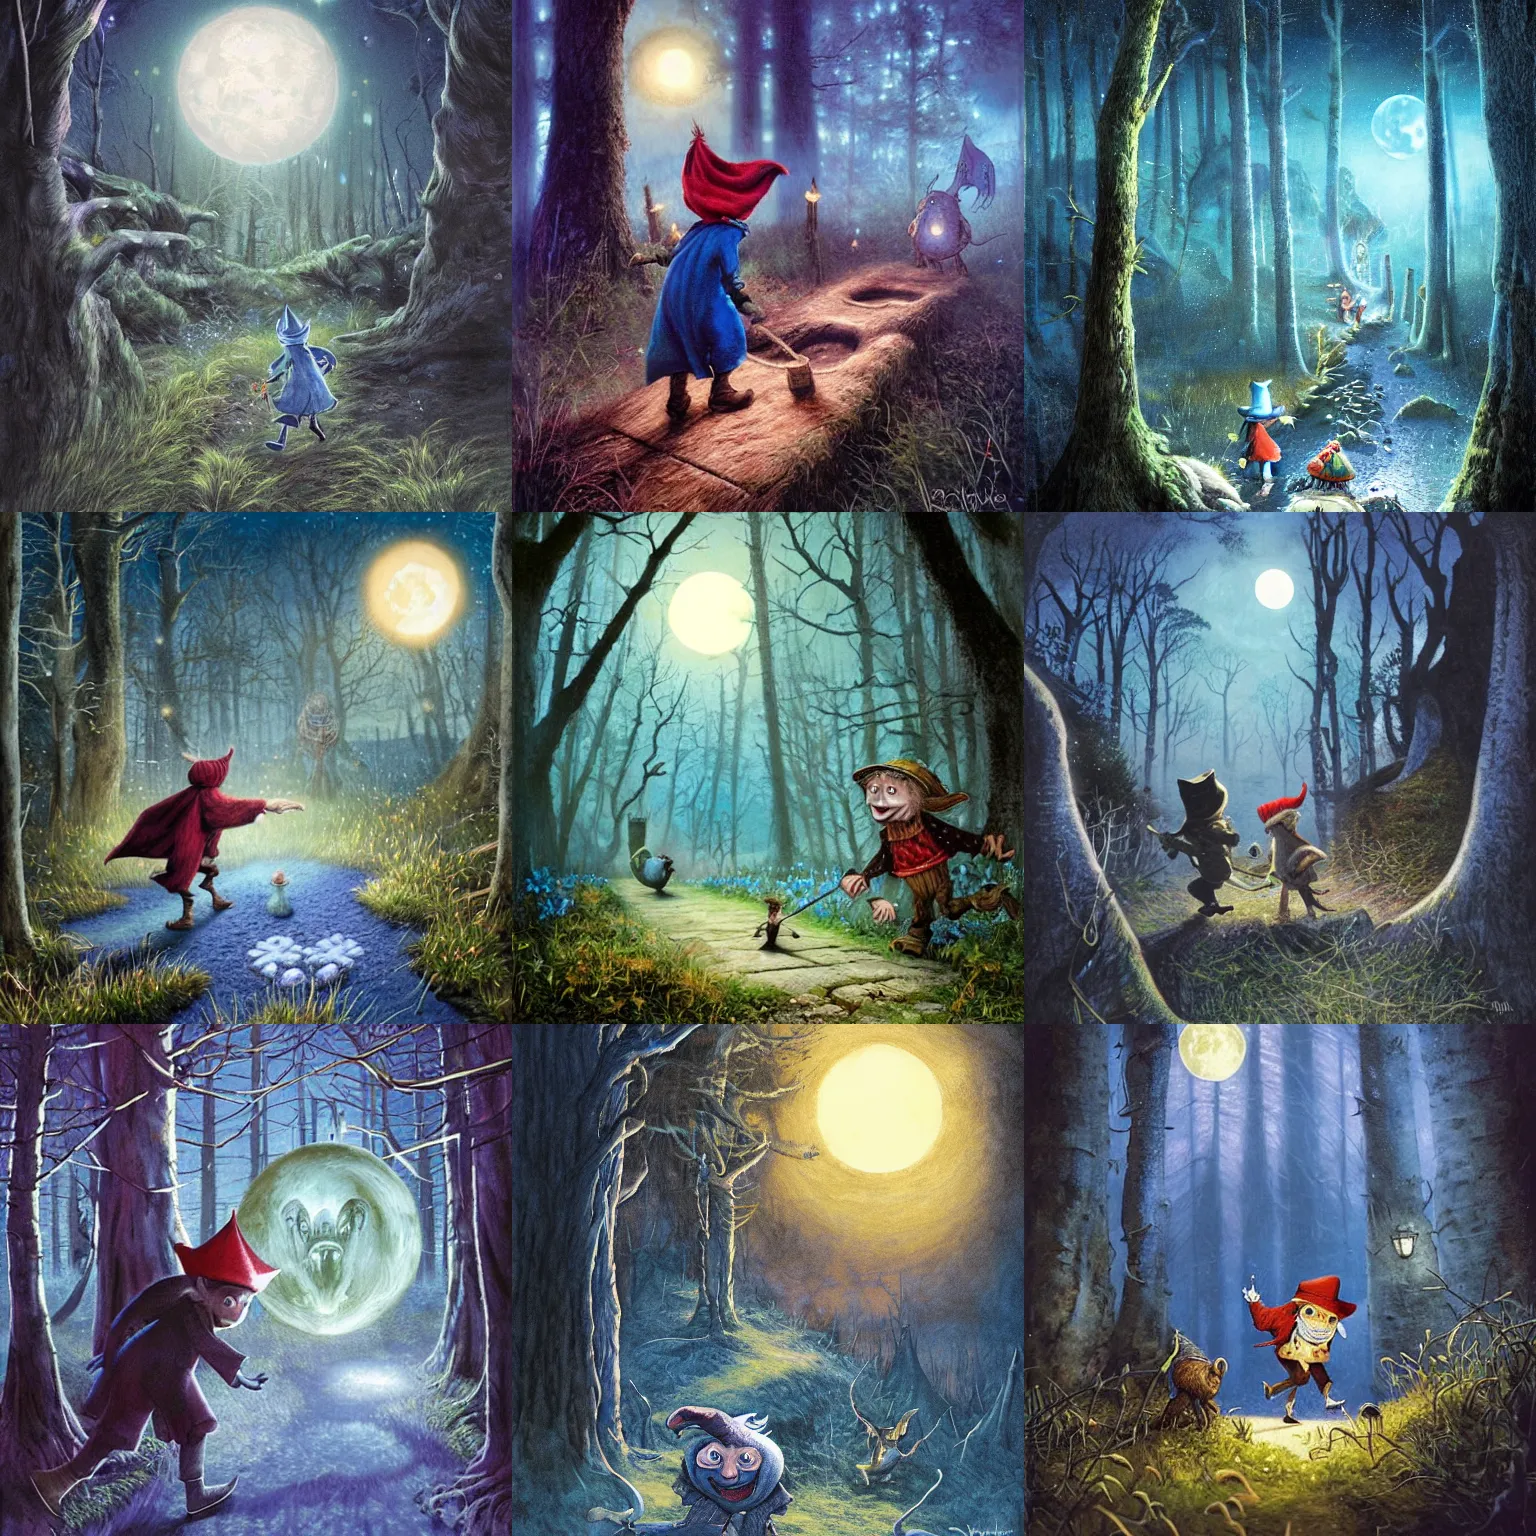 Prompt: Rincewind is running away from a troll in the Forbidden Forest, at night, full moon detailed, hyperrealistic, colorful, blue tones, cinematic lighting, photorealistic, digital art by Paul Kidby, Kate Oleska and Jim Kay